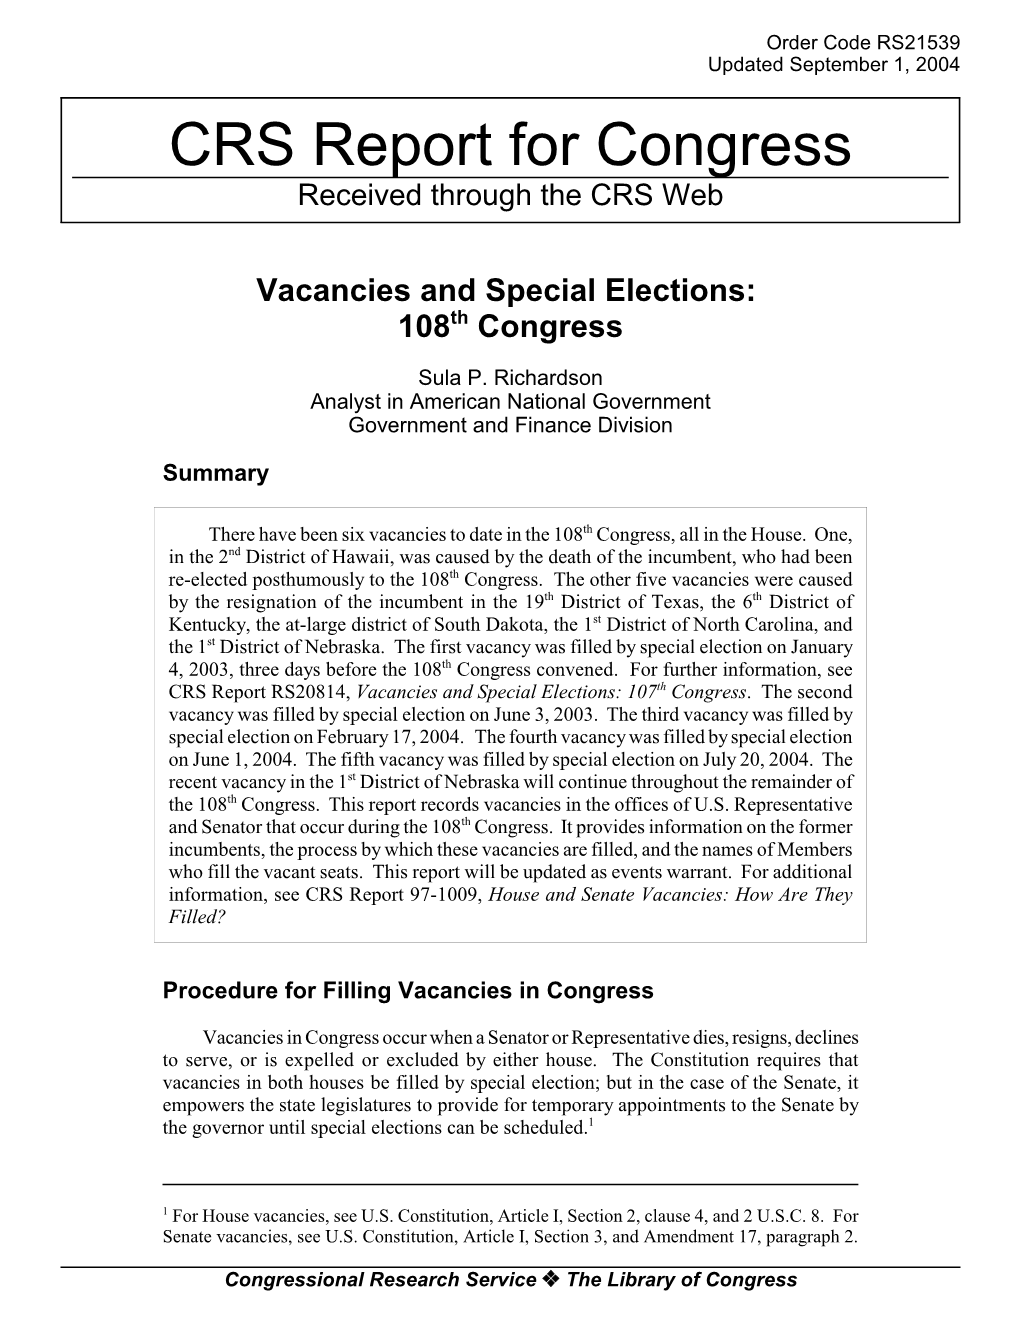 Vacancies and Special Elections: 108Th Congress